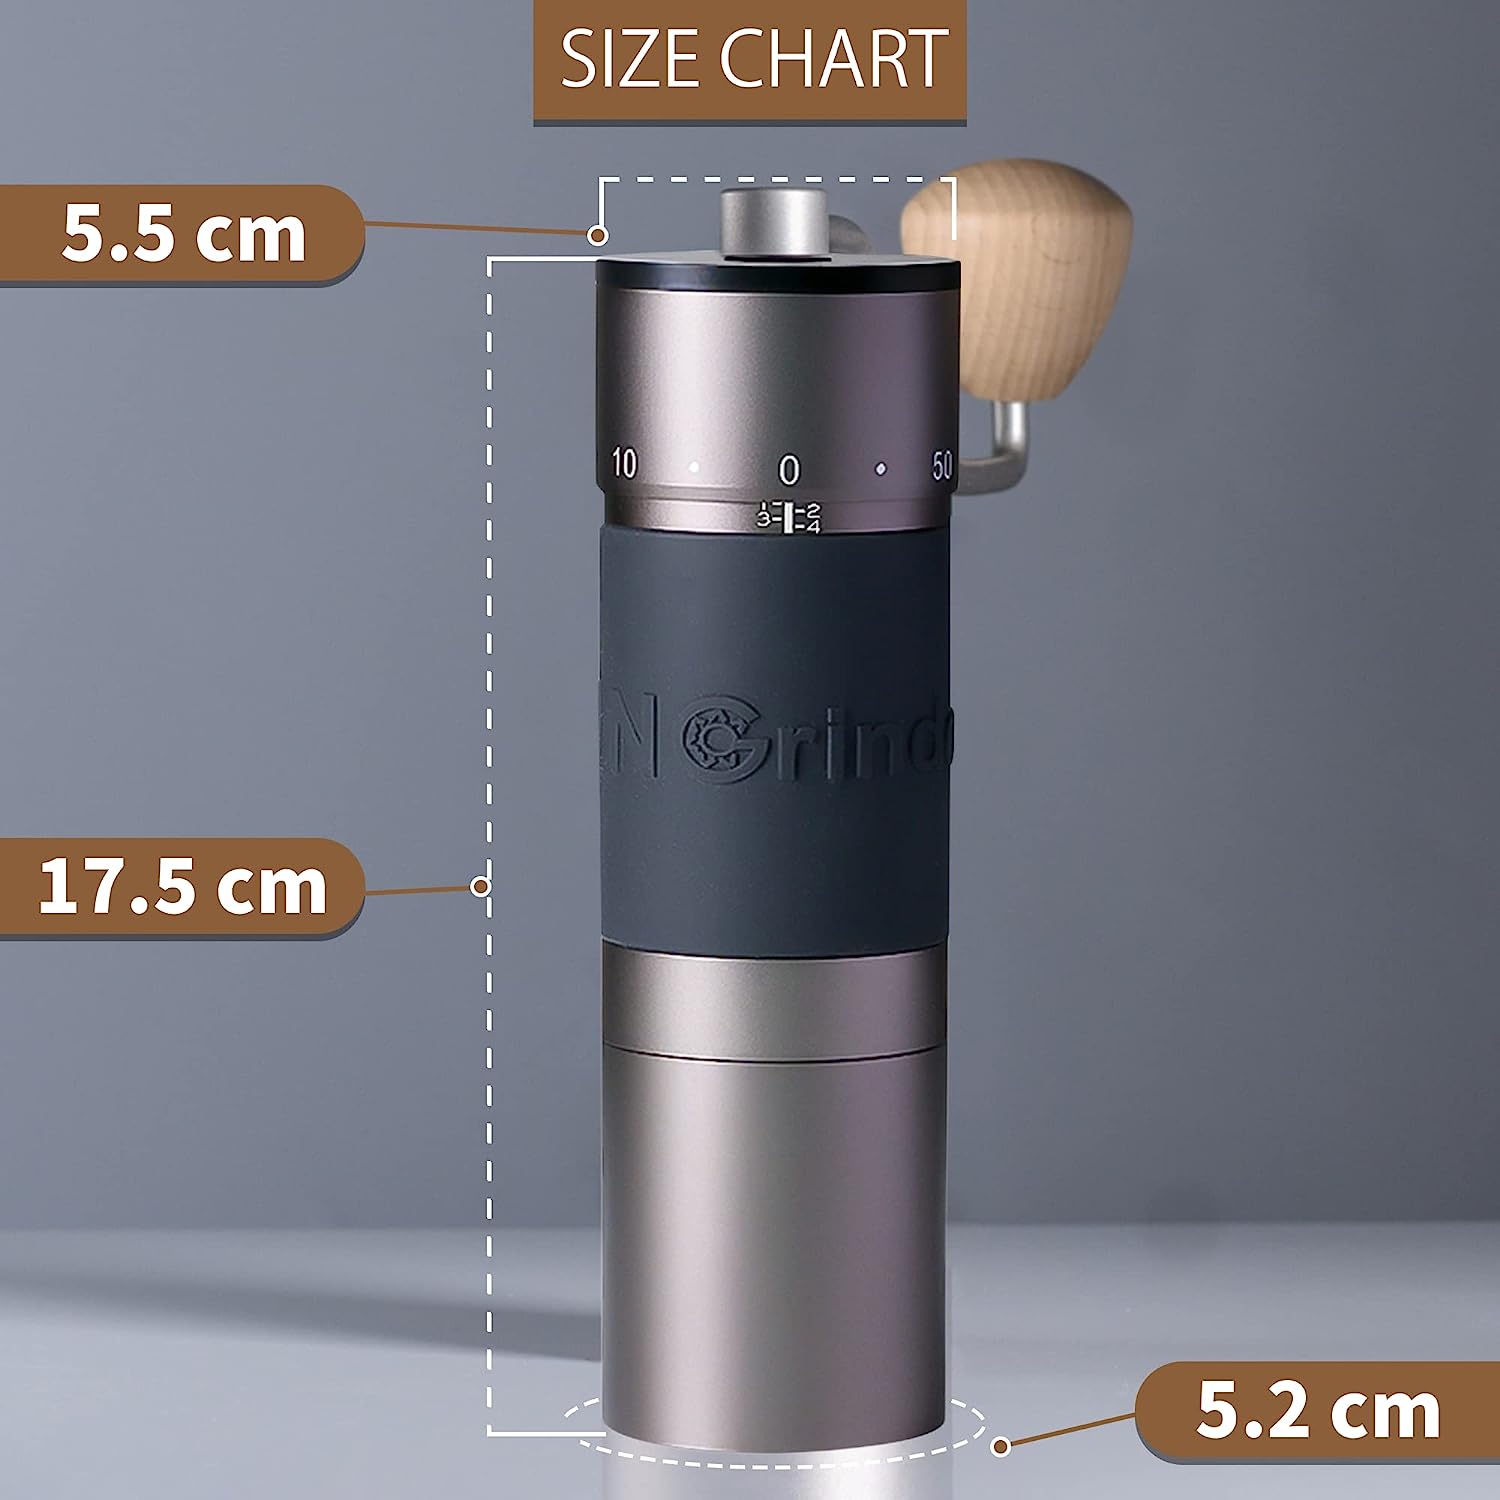 KINGrinder K_6 Grey Manual Hand Coffee Grinder 240 Adjustable Grinding Levels for Aero Press, Drops, Espresso with Mounting Consistency, Stainless Steel Conical Milling Grinder 35 g Capacity
